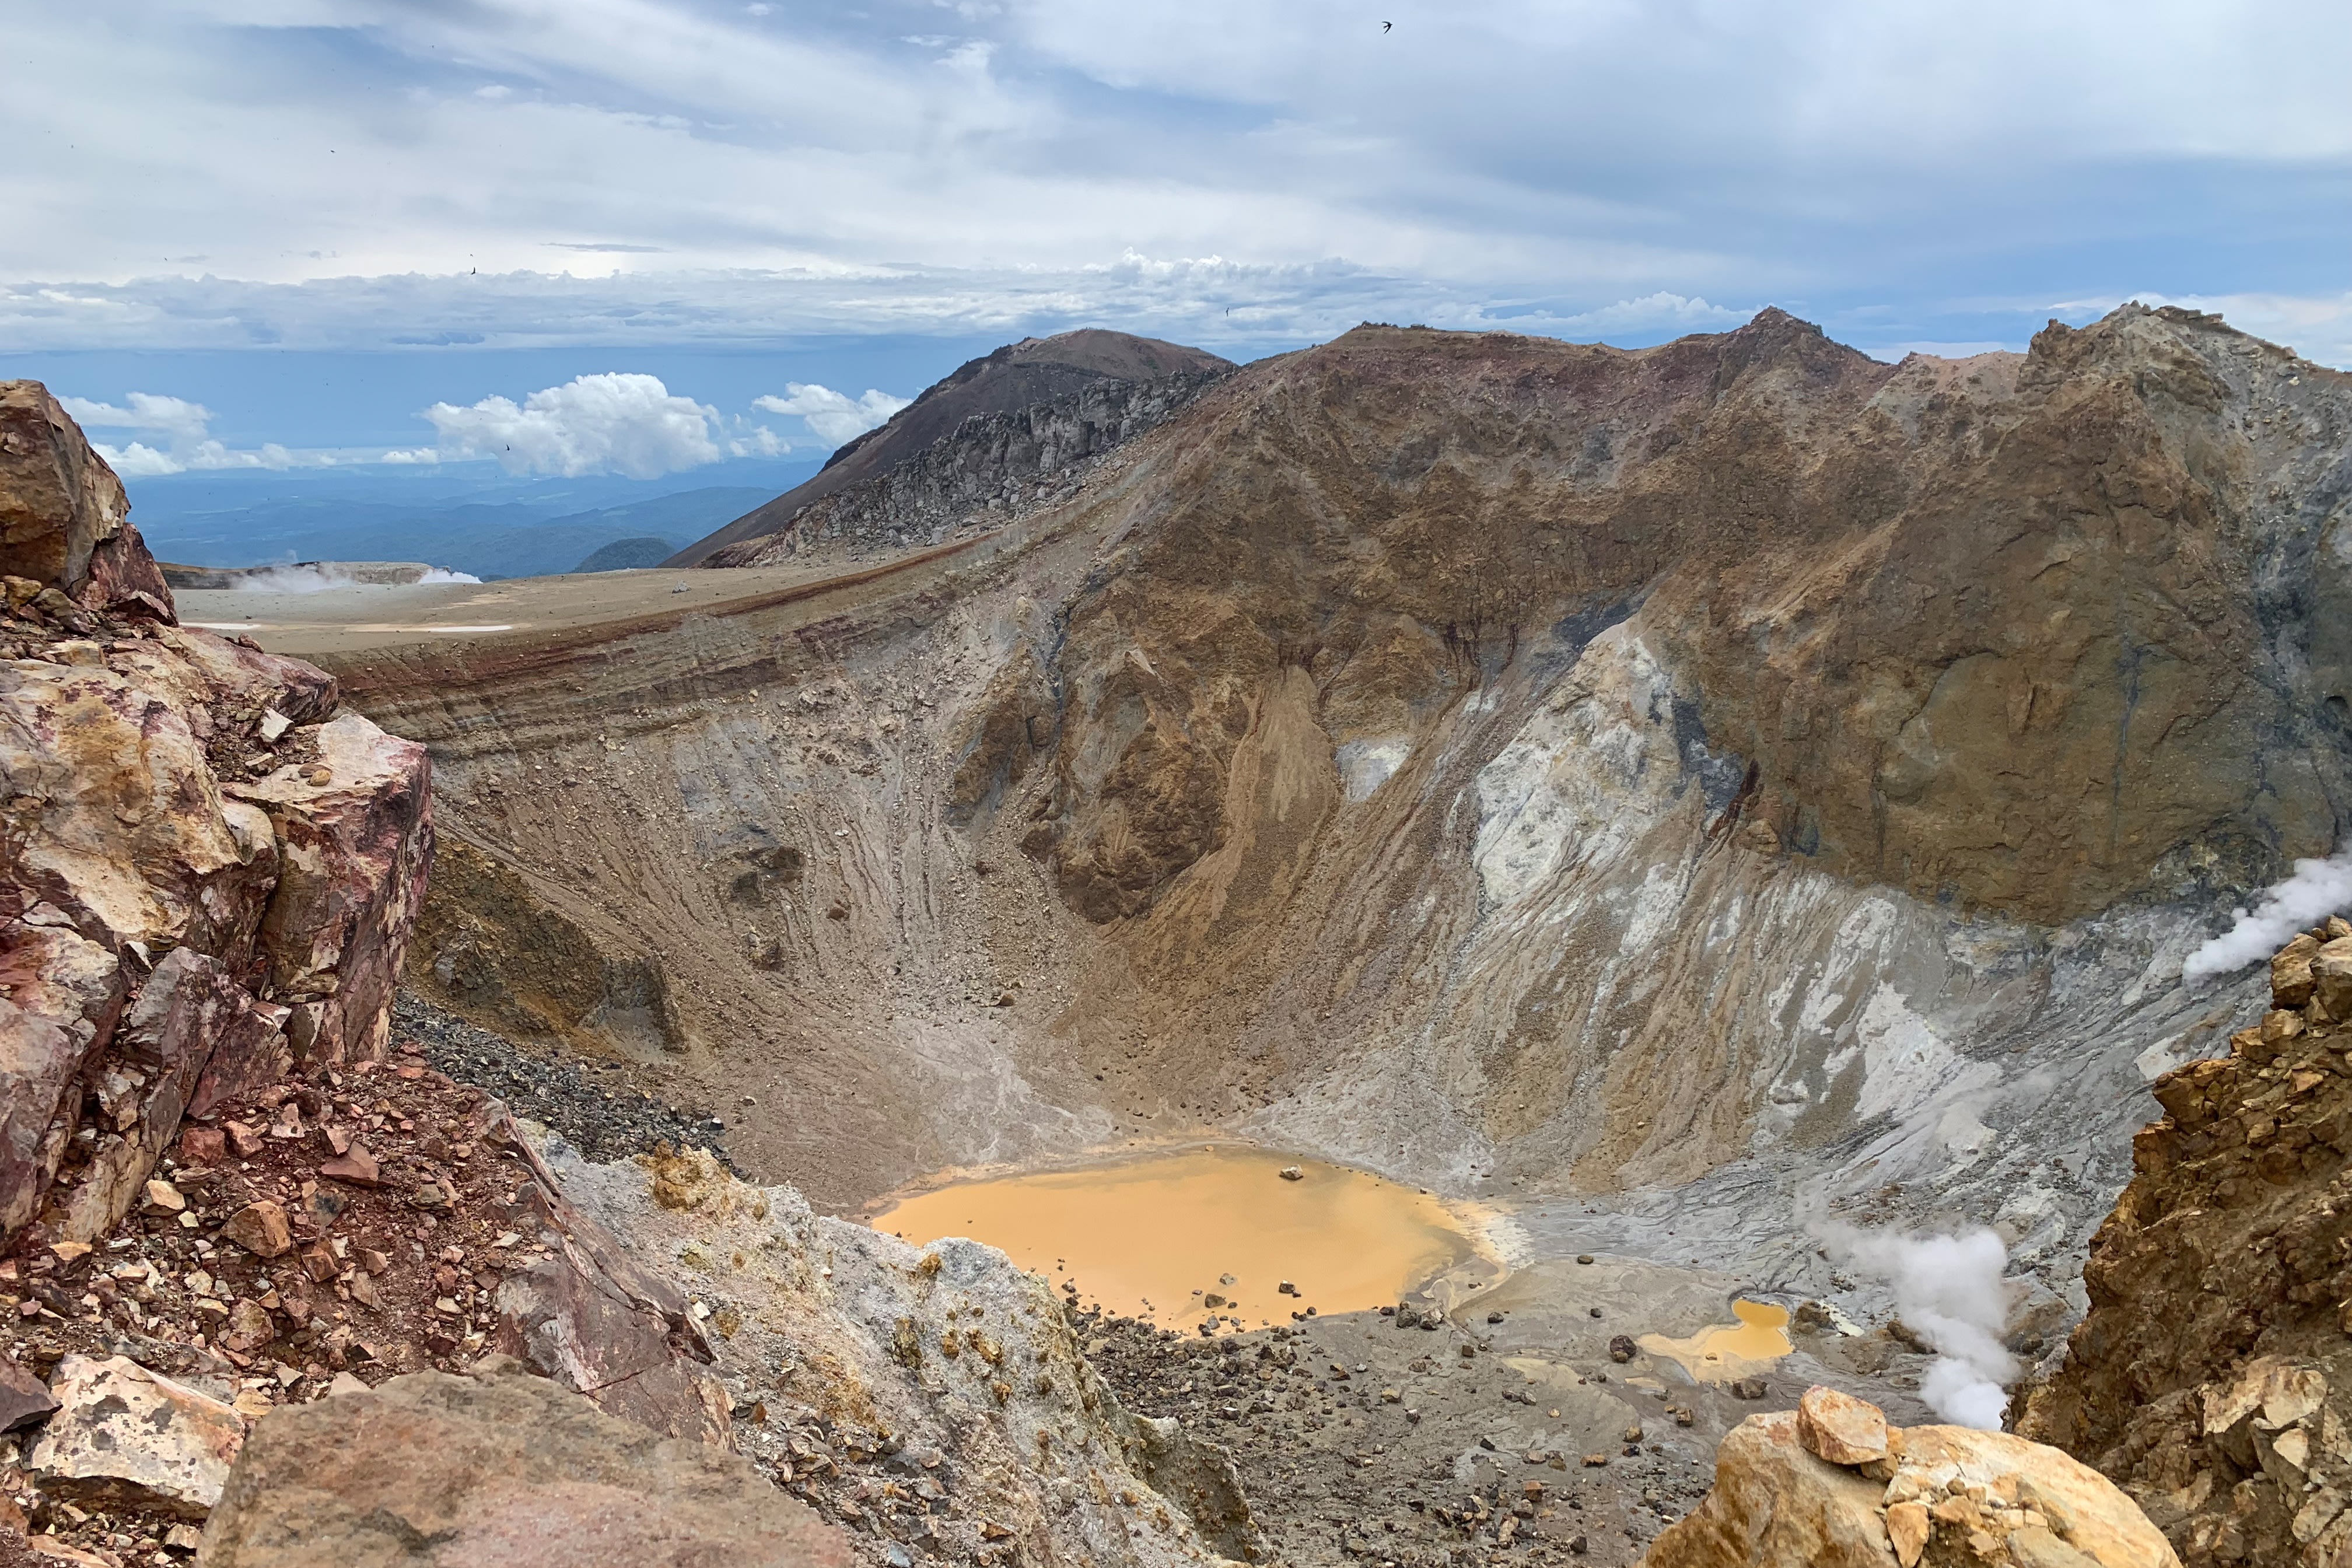 A dramatic view of a volcanic crater on Mt Meakan. There is a brown lake deep in the bottom of the crater, while steam billows up from vents.